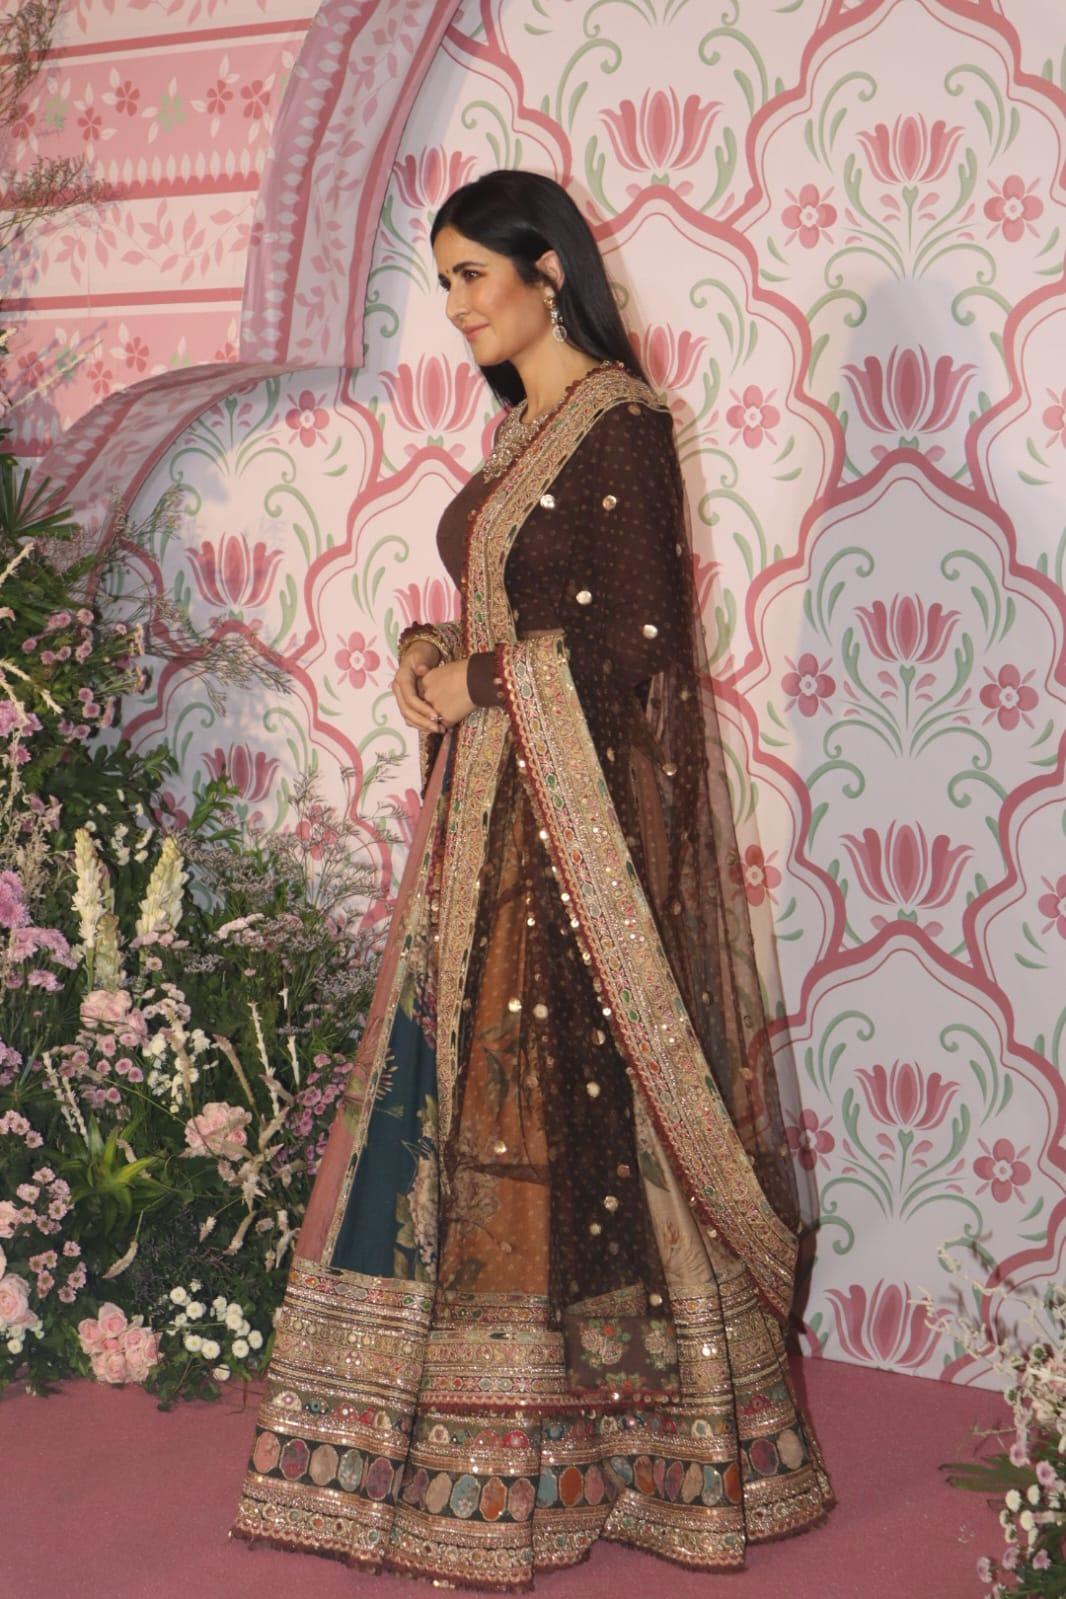 The actress opted for a striking chocolate brown lehenga for the occasion